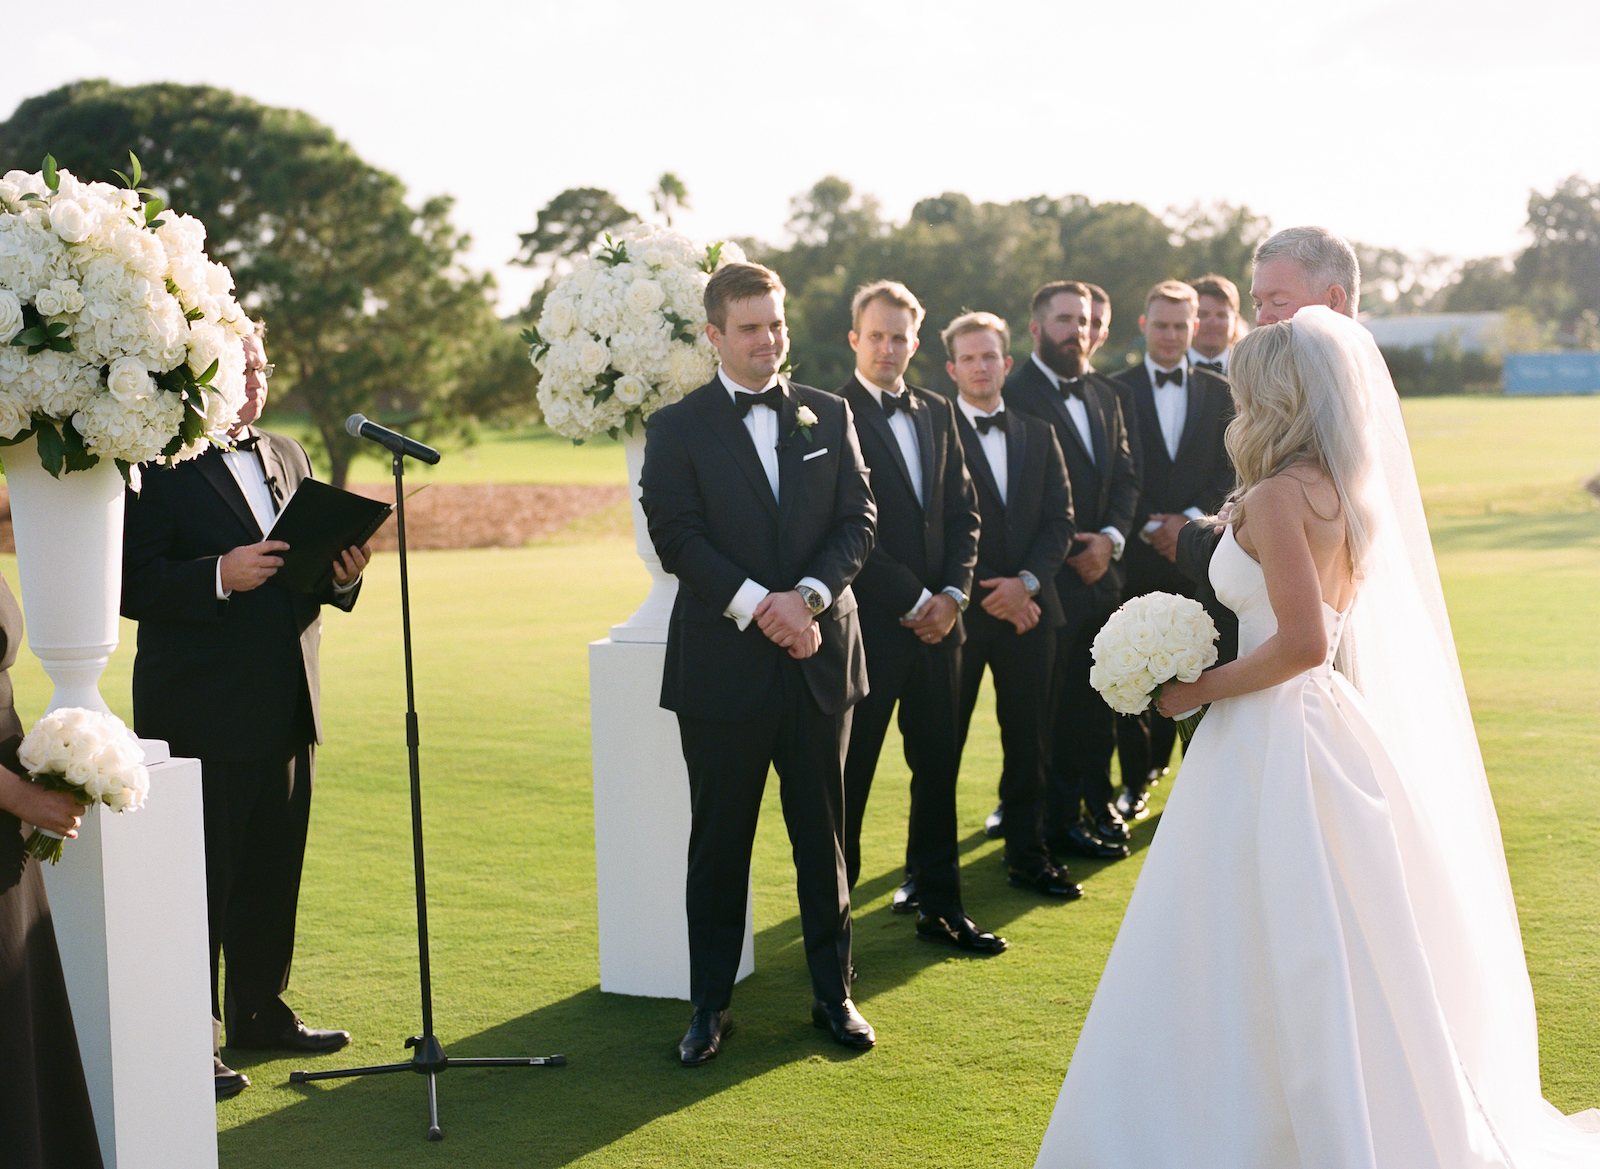 Luxurious Black and White Formal Wedding Ceremony, Bride Walked by Father, Groom and Groomsmen in Black Tuxedos | Tampa Bay Wedding Florist Bruce Wayne Florals